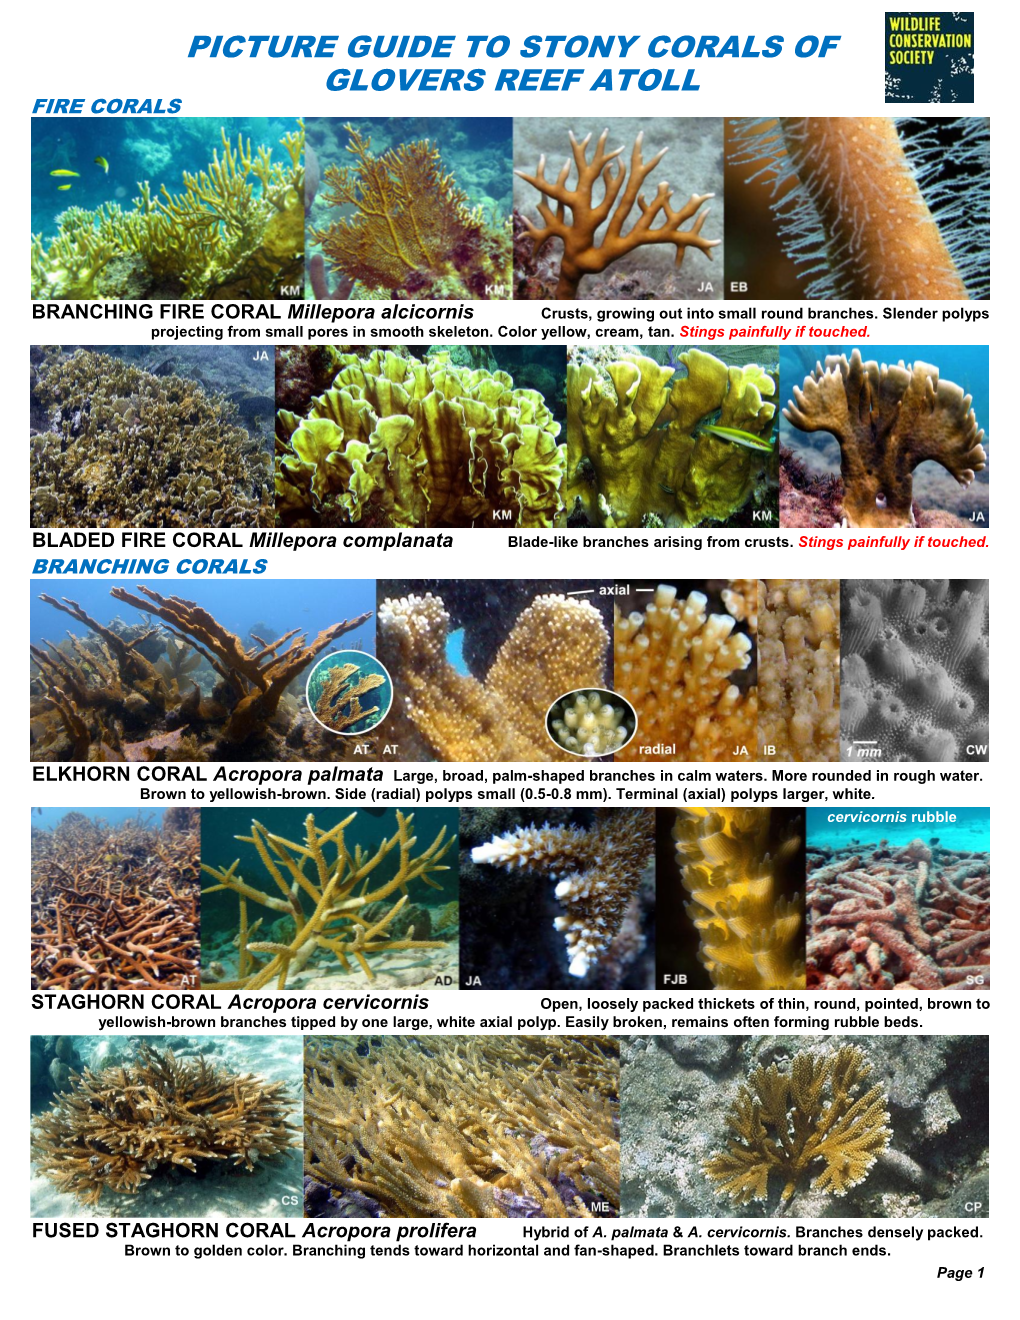 Stony Corals of Glovers Reef Atoll Fire Corals